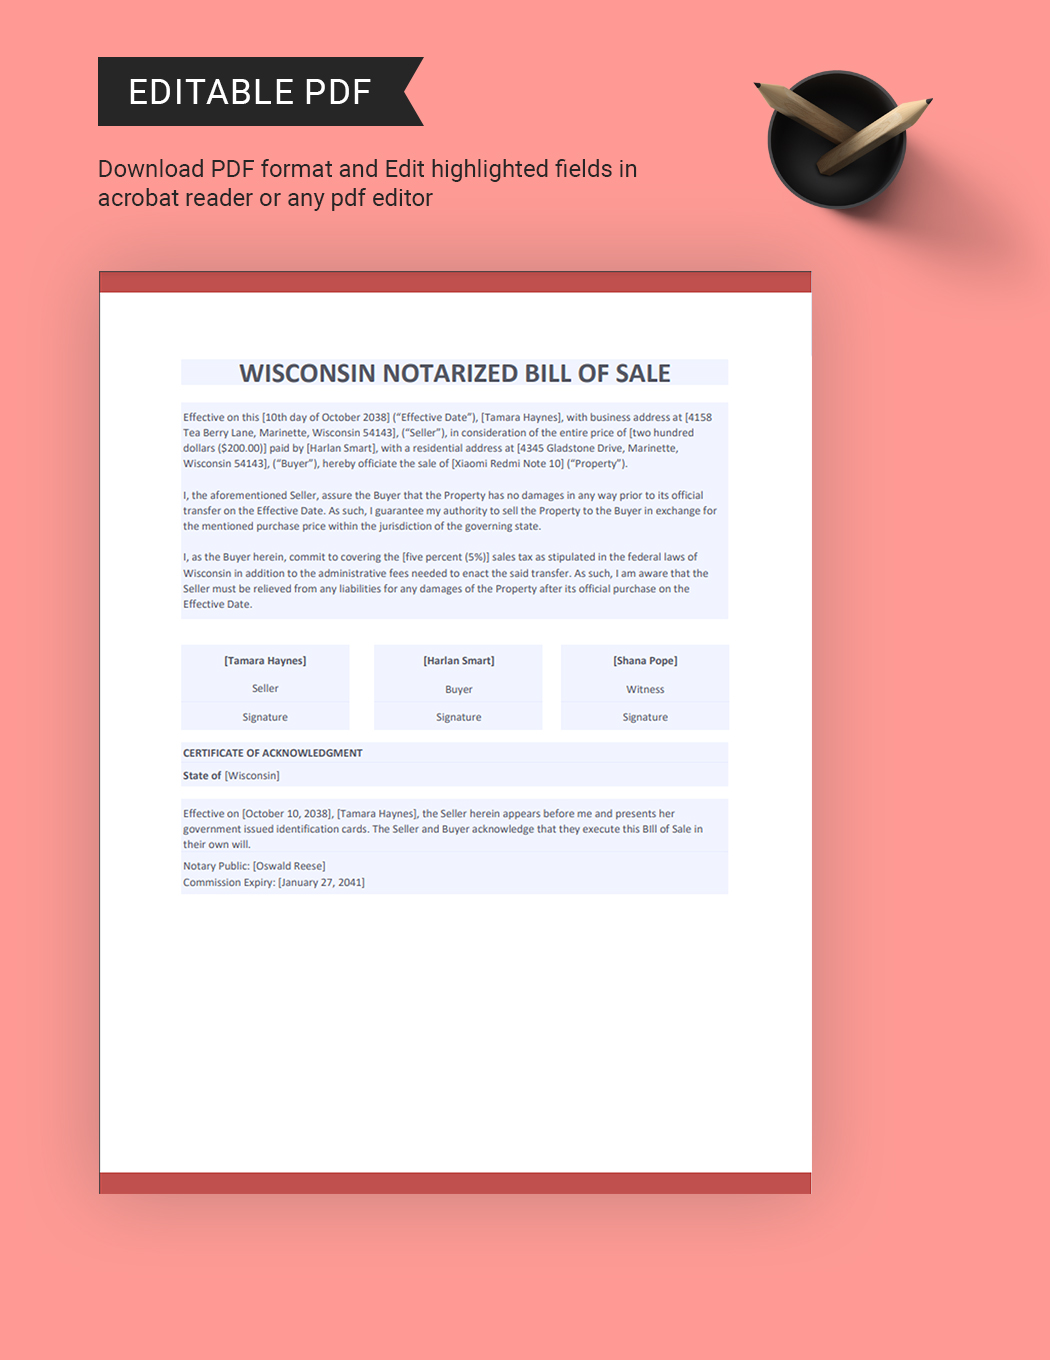 Wisconsin Notarized Bill of Sale Template